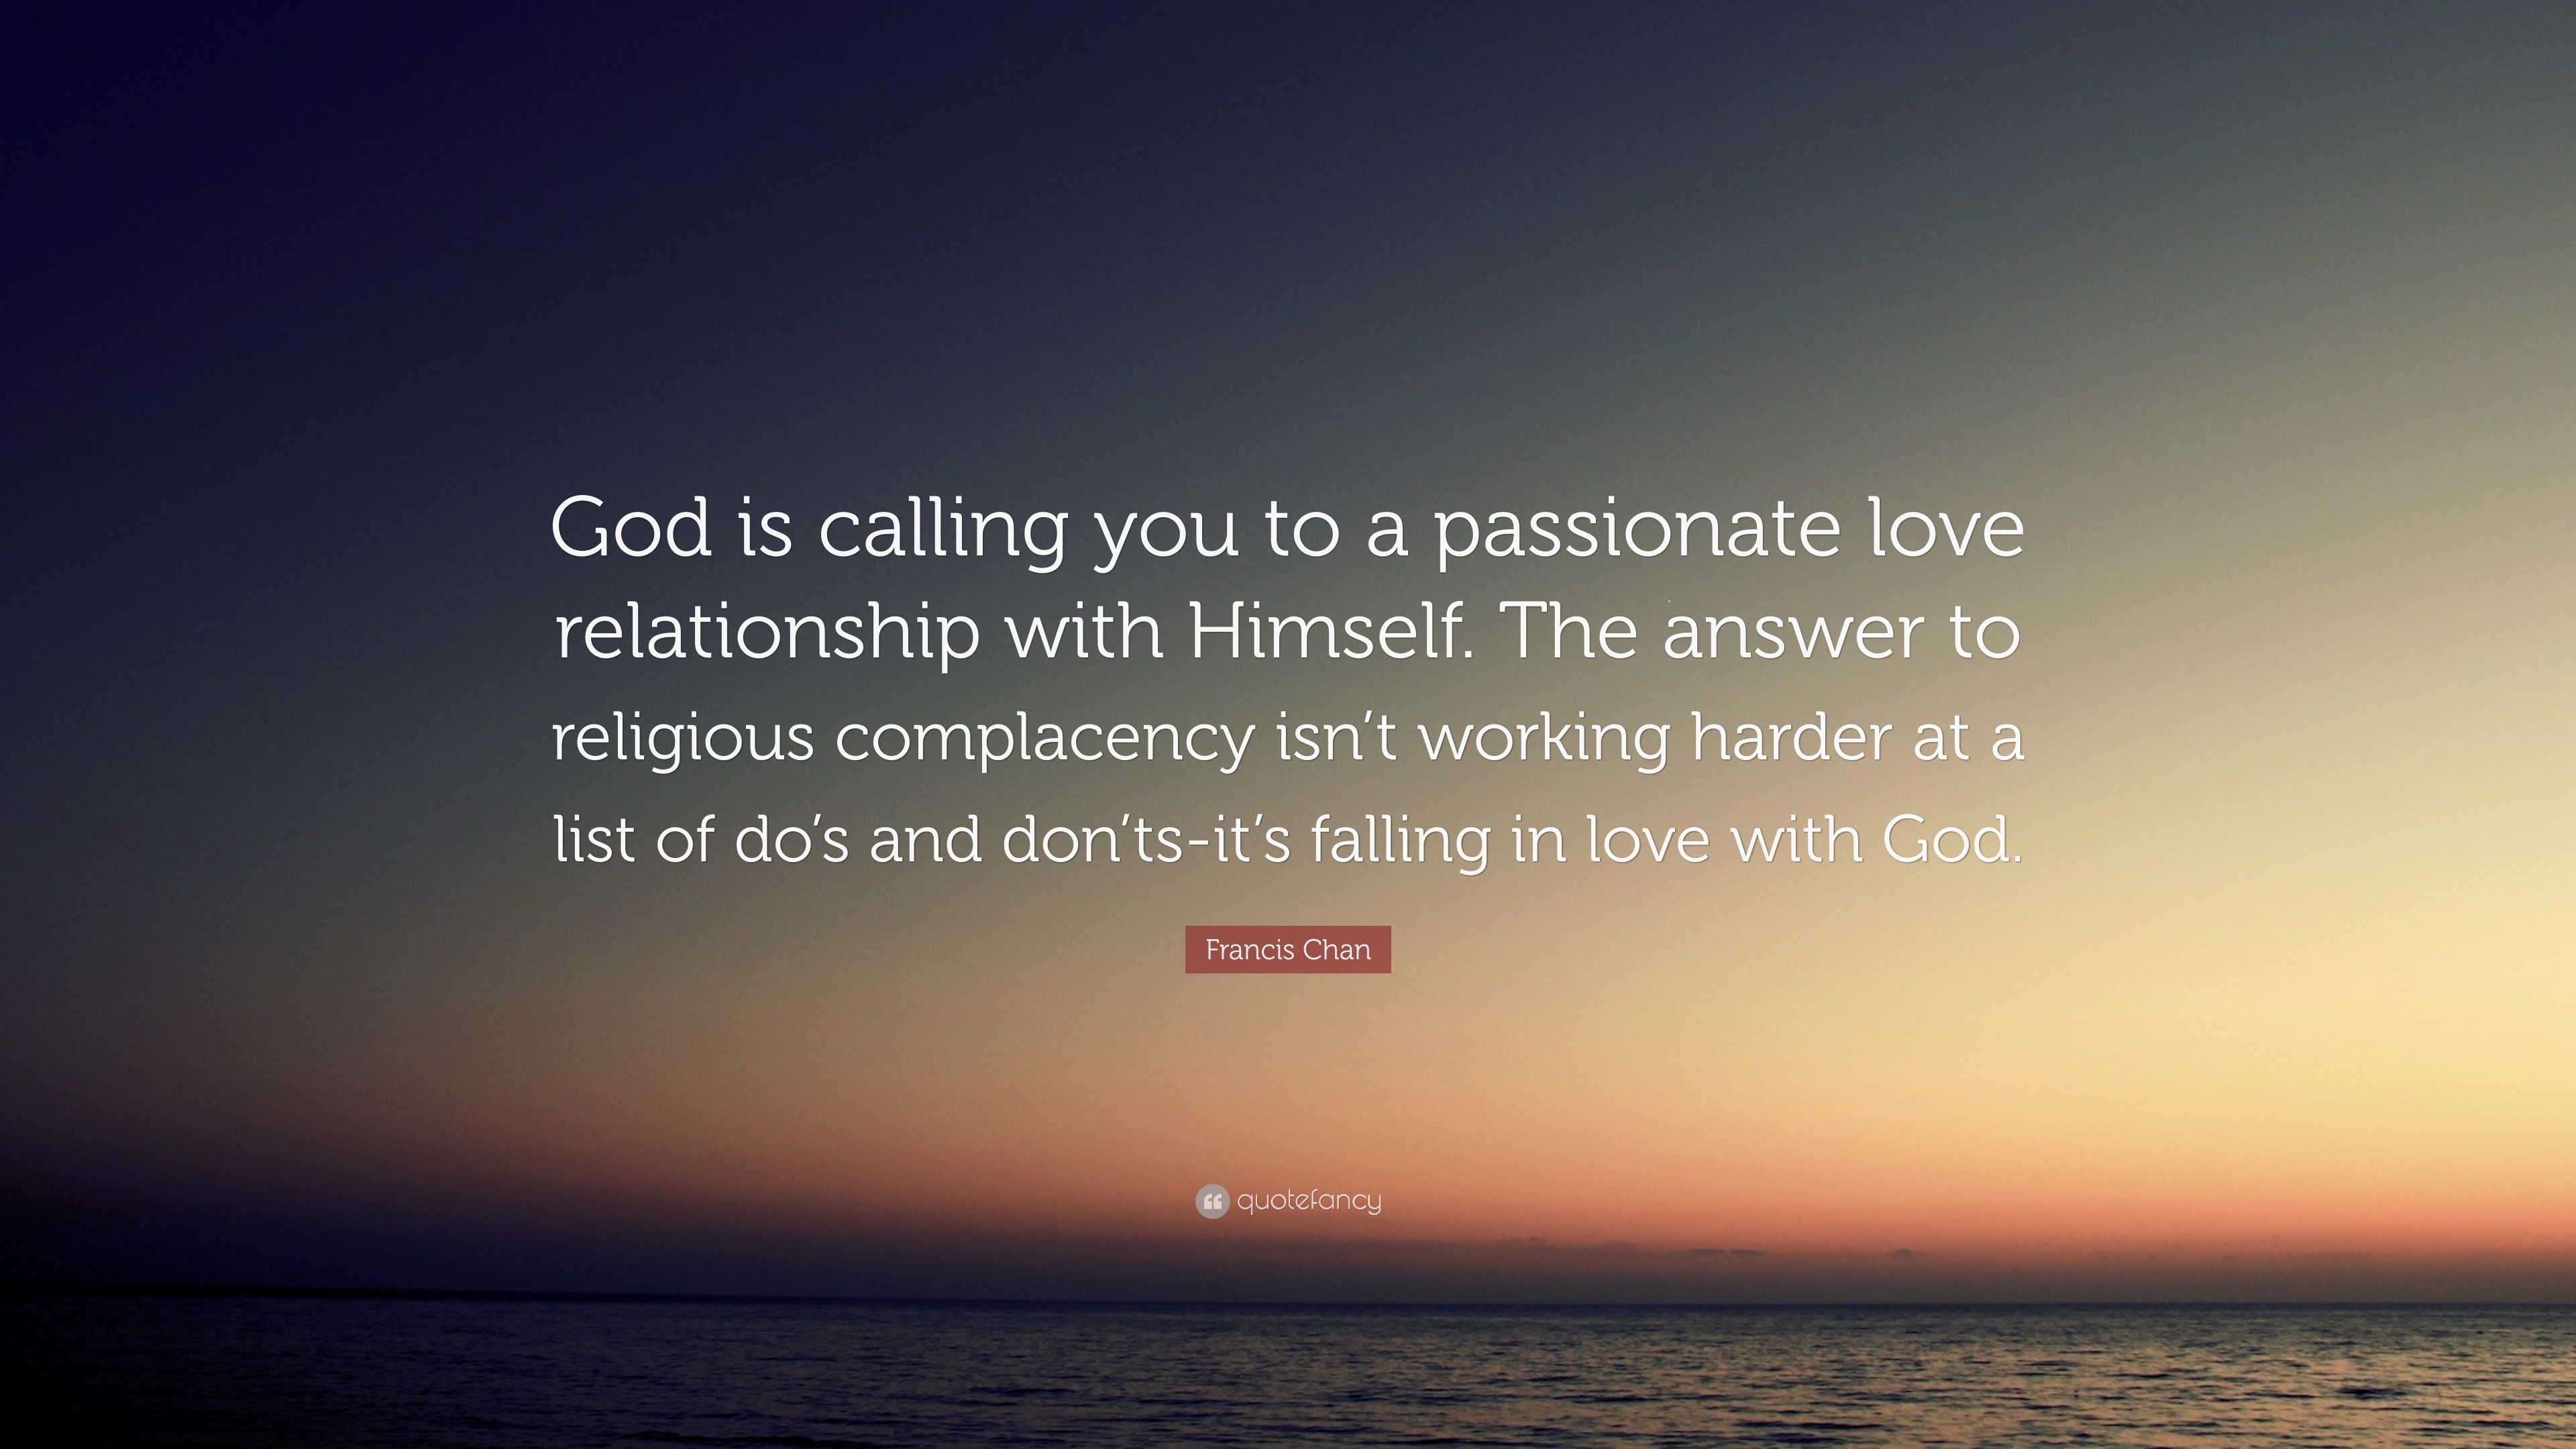 Francis Chan Quote “God is calling you to a passionate love relationship with Himself